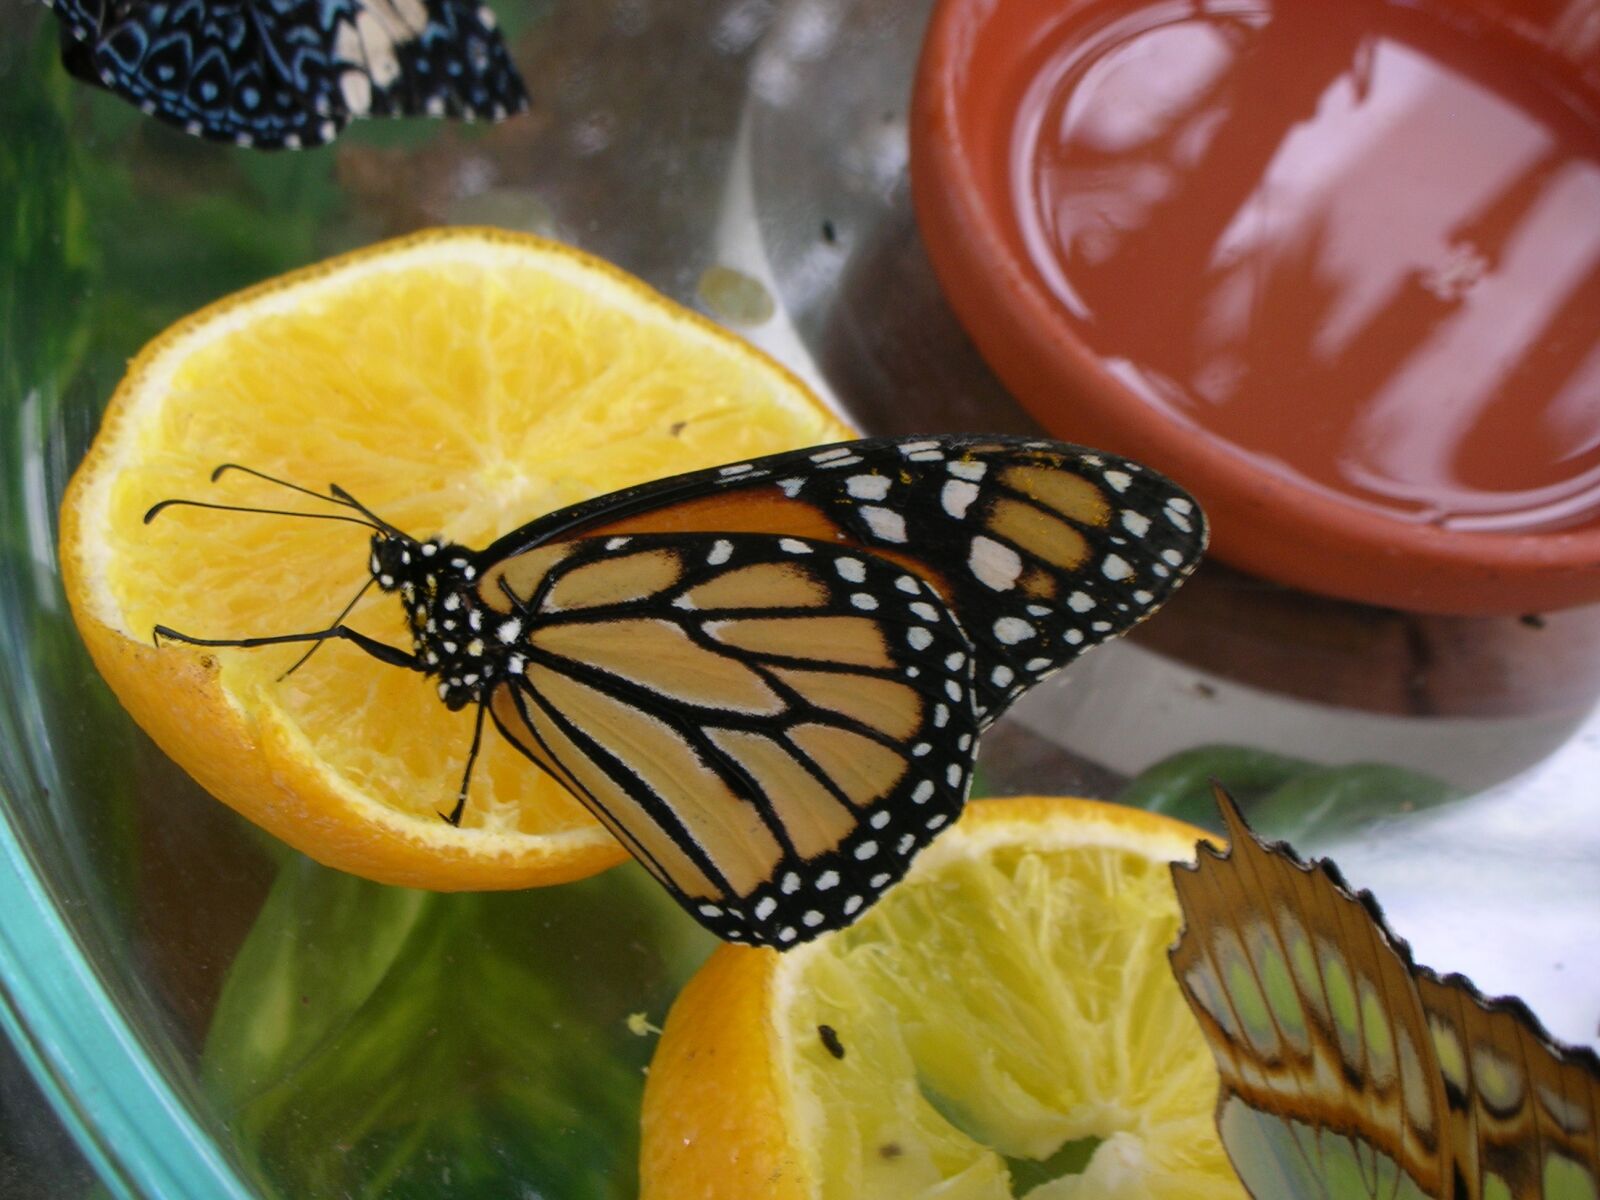 Nikon S1 sample photo. Butterfly, food, fruit photography